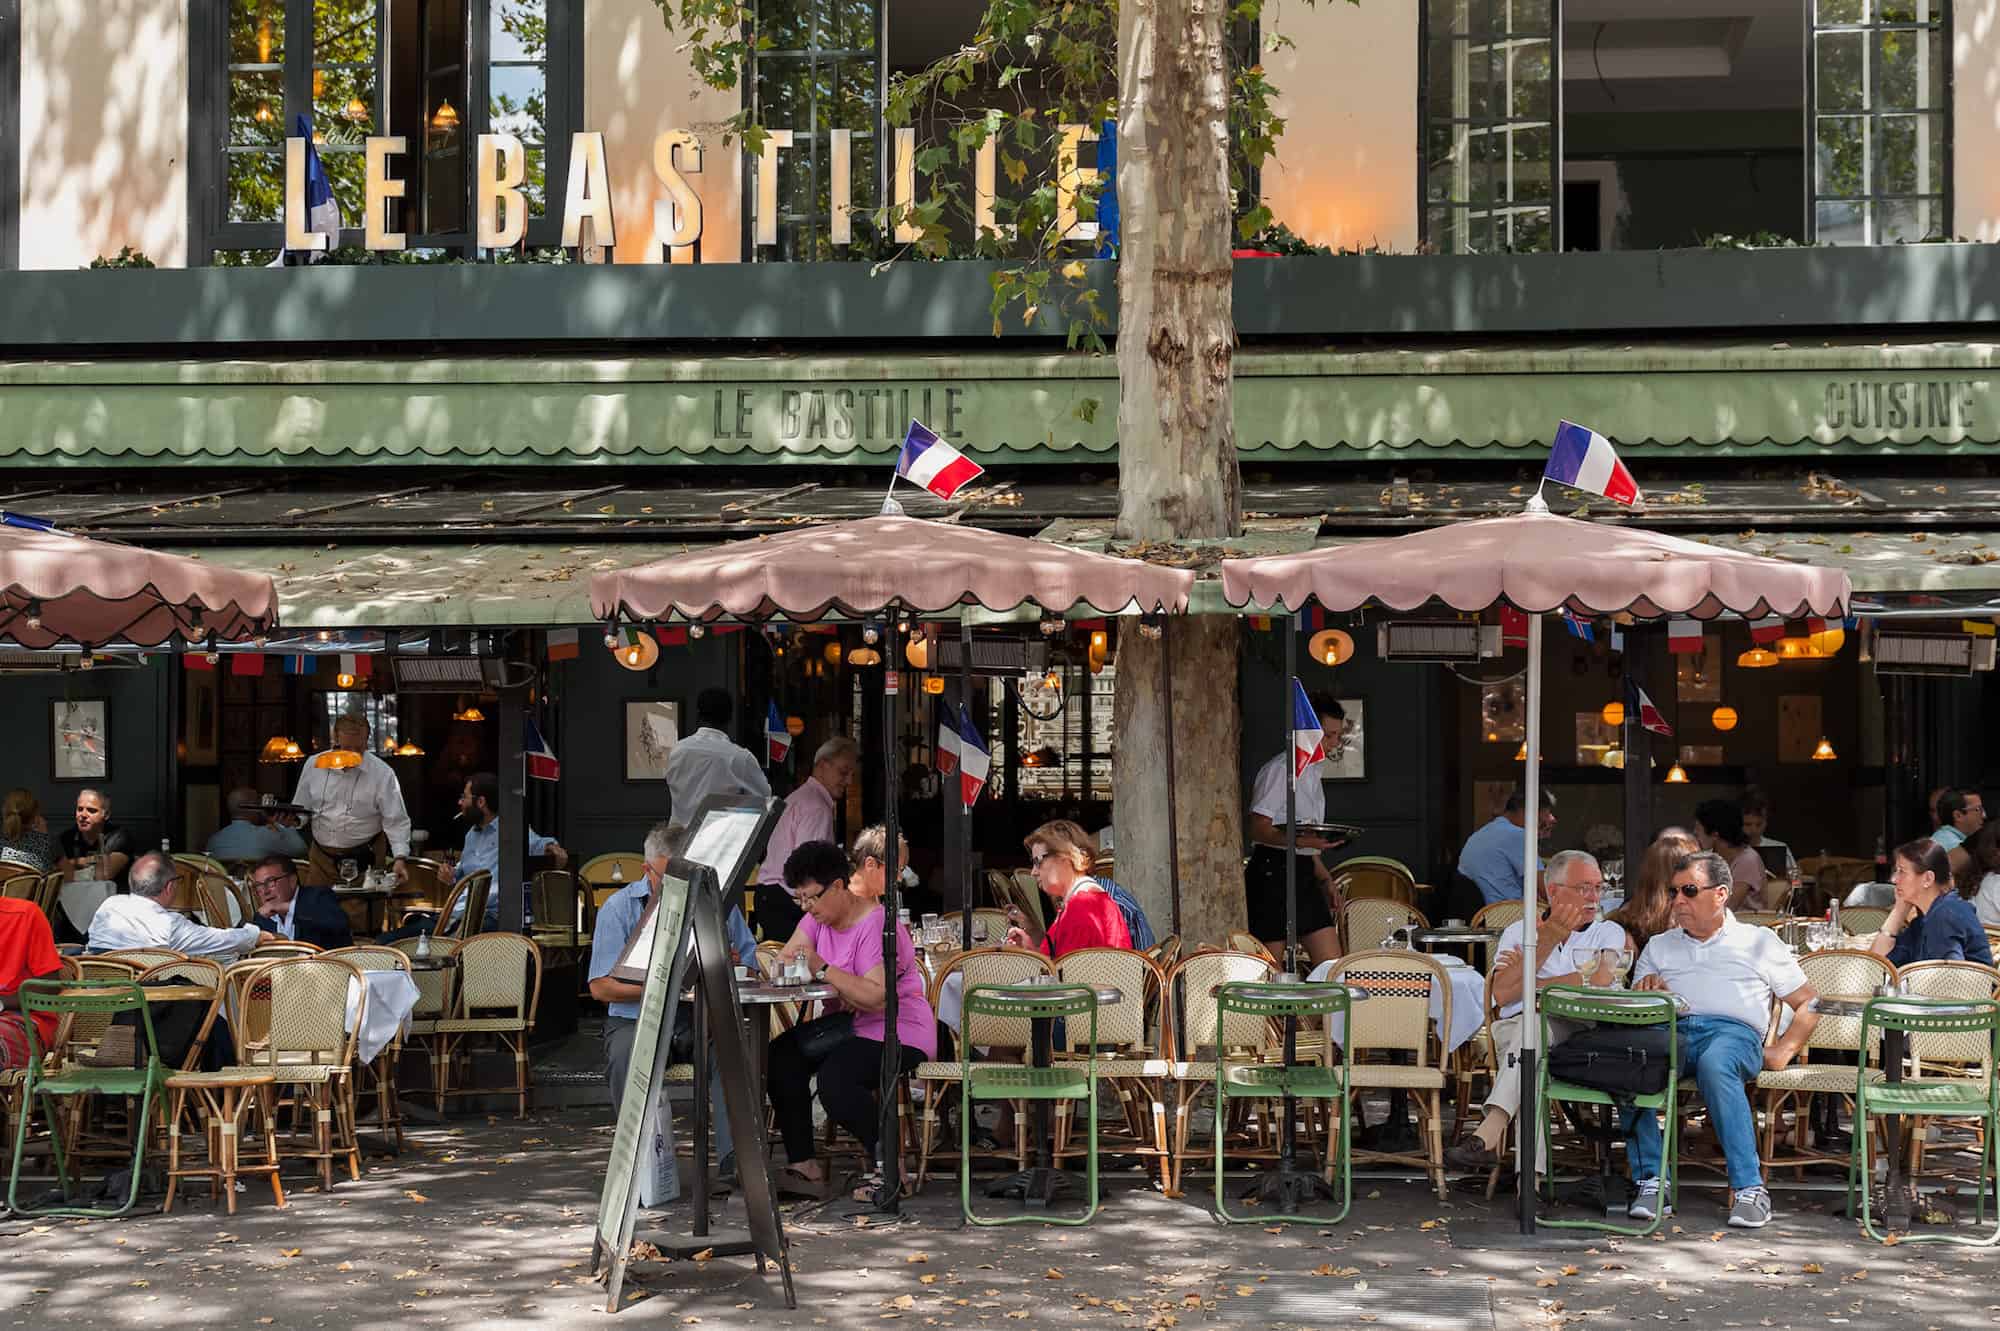 Speak French in no time by practising with locals on cafe terraces all over Paris.